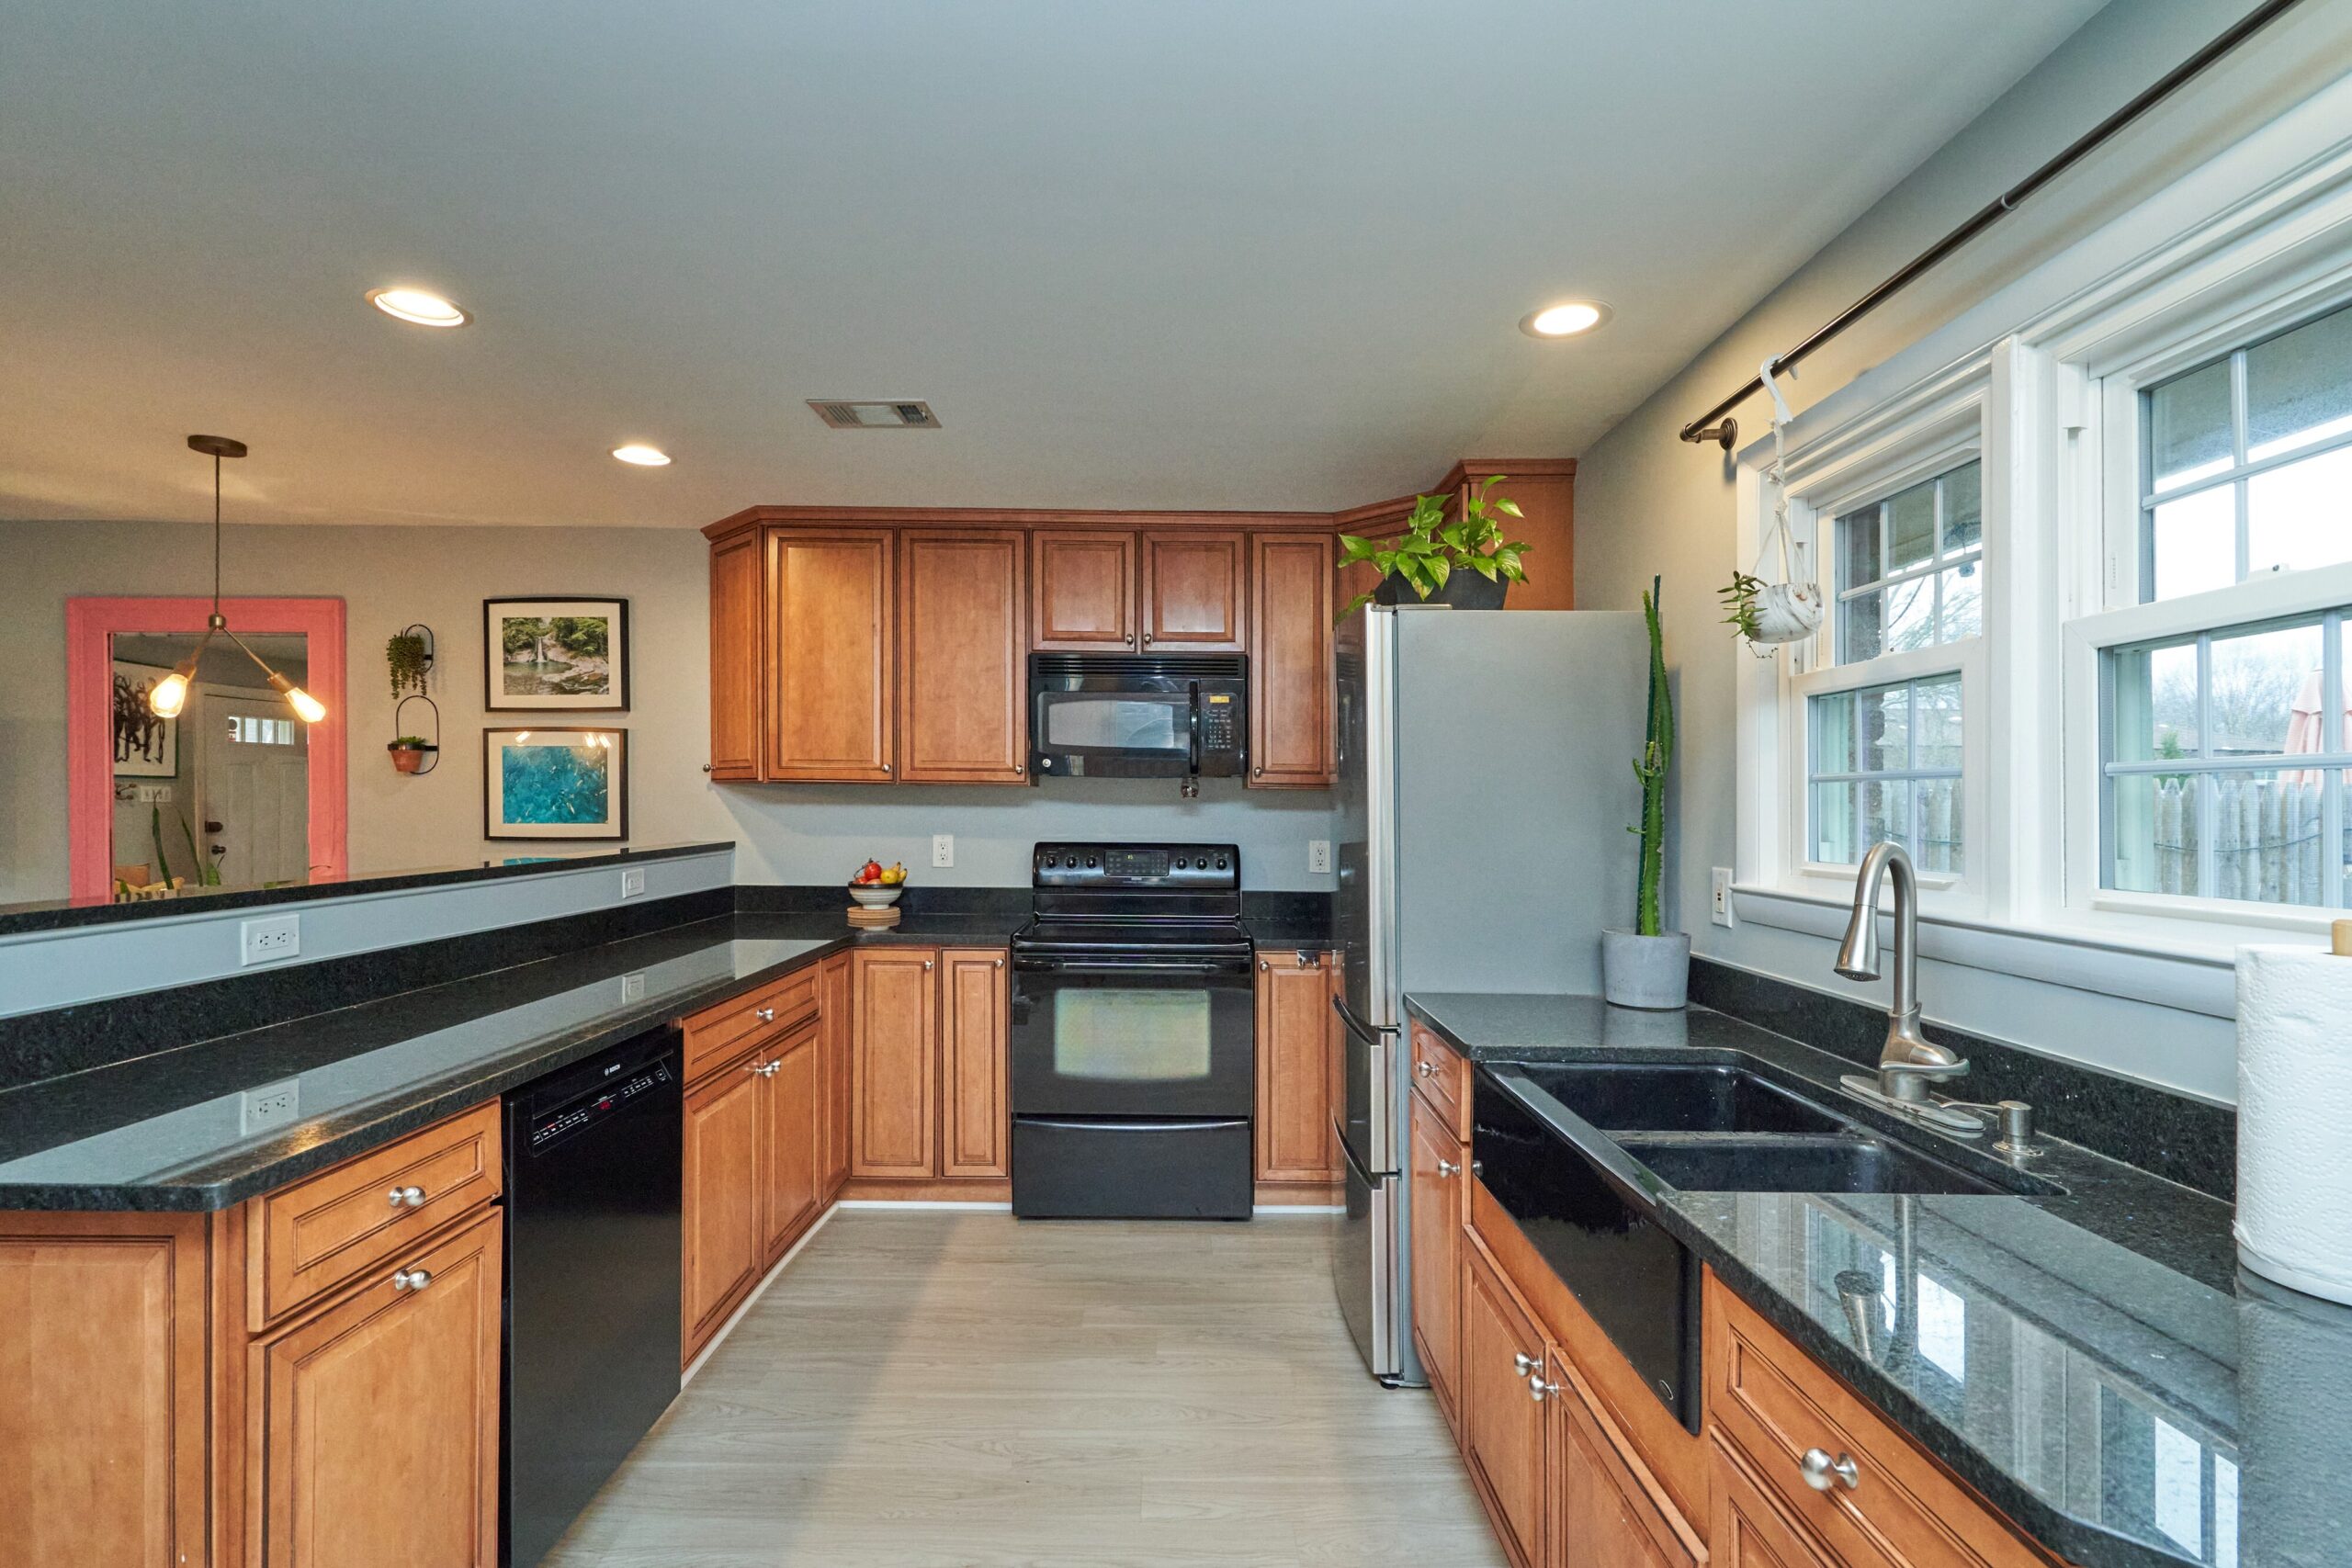 Professional interior photo of 415 James Ct in Falls Church City - showing the kitchen with high bar top over regular counter, wooden cabinets, farm sink and stainless updated appliances